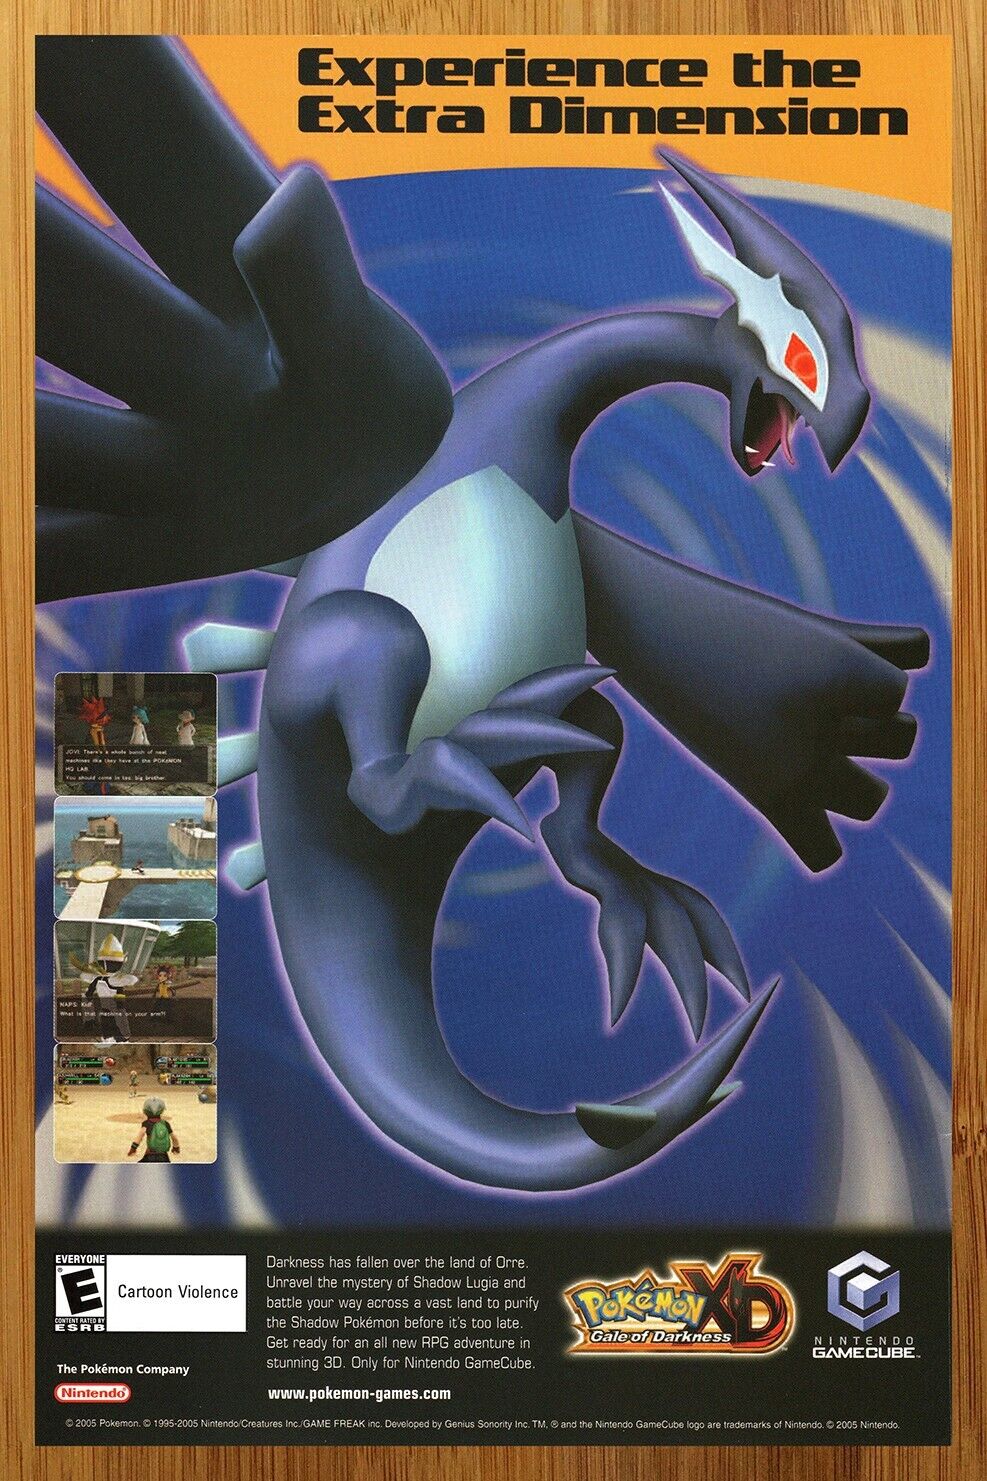 2005 Pokemon XD Gale of Darkness Gamecube Print Ad/Poster Official Promo Art 00s